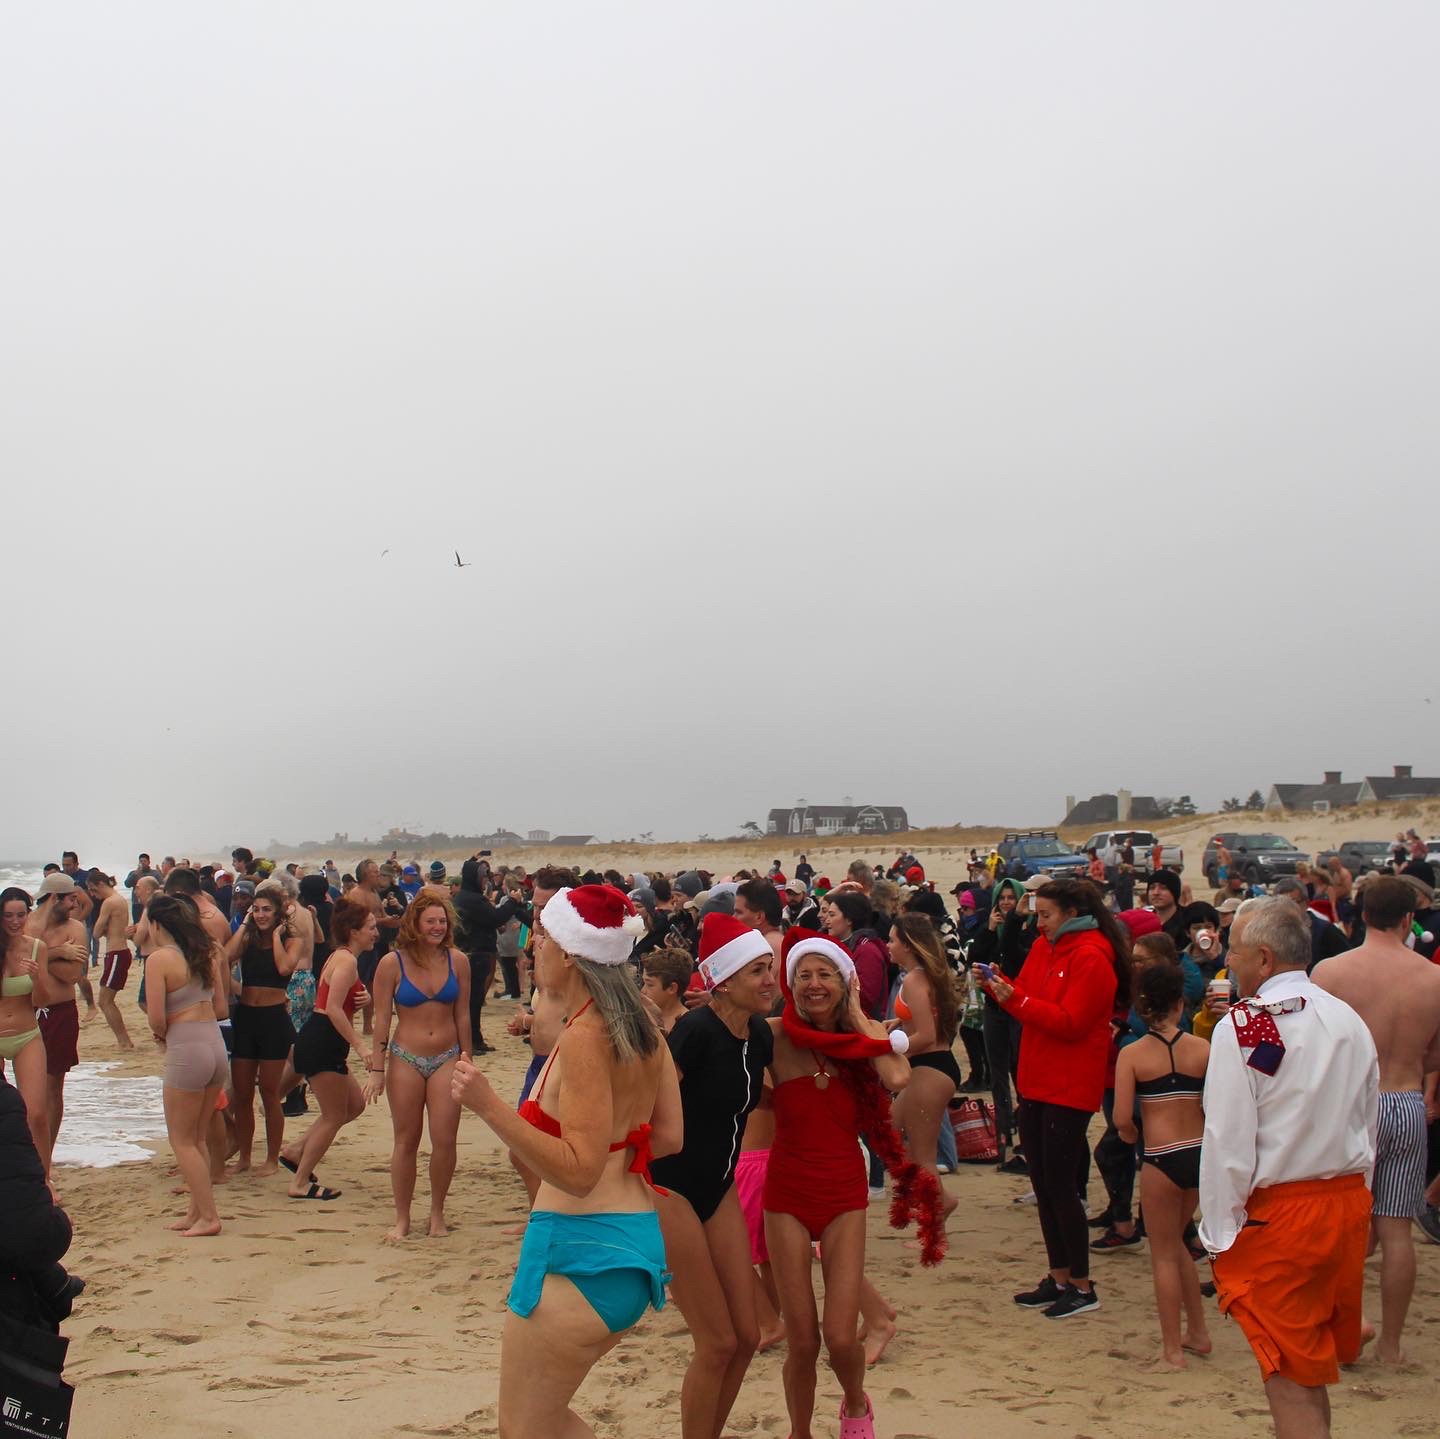 a large group of people mingling at the beach